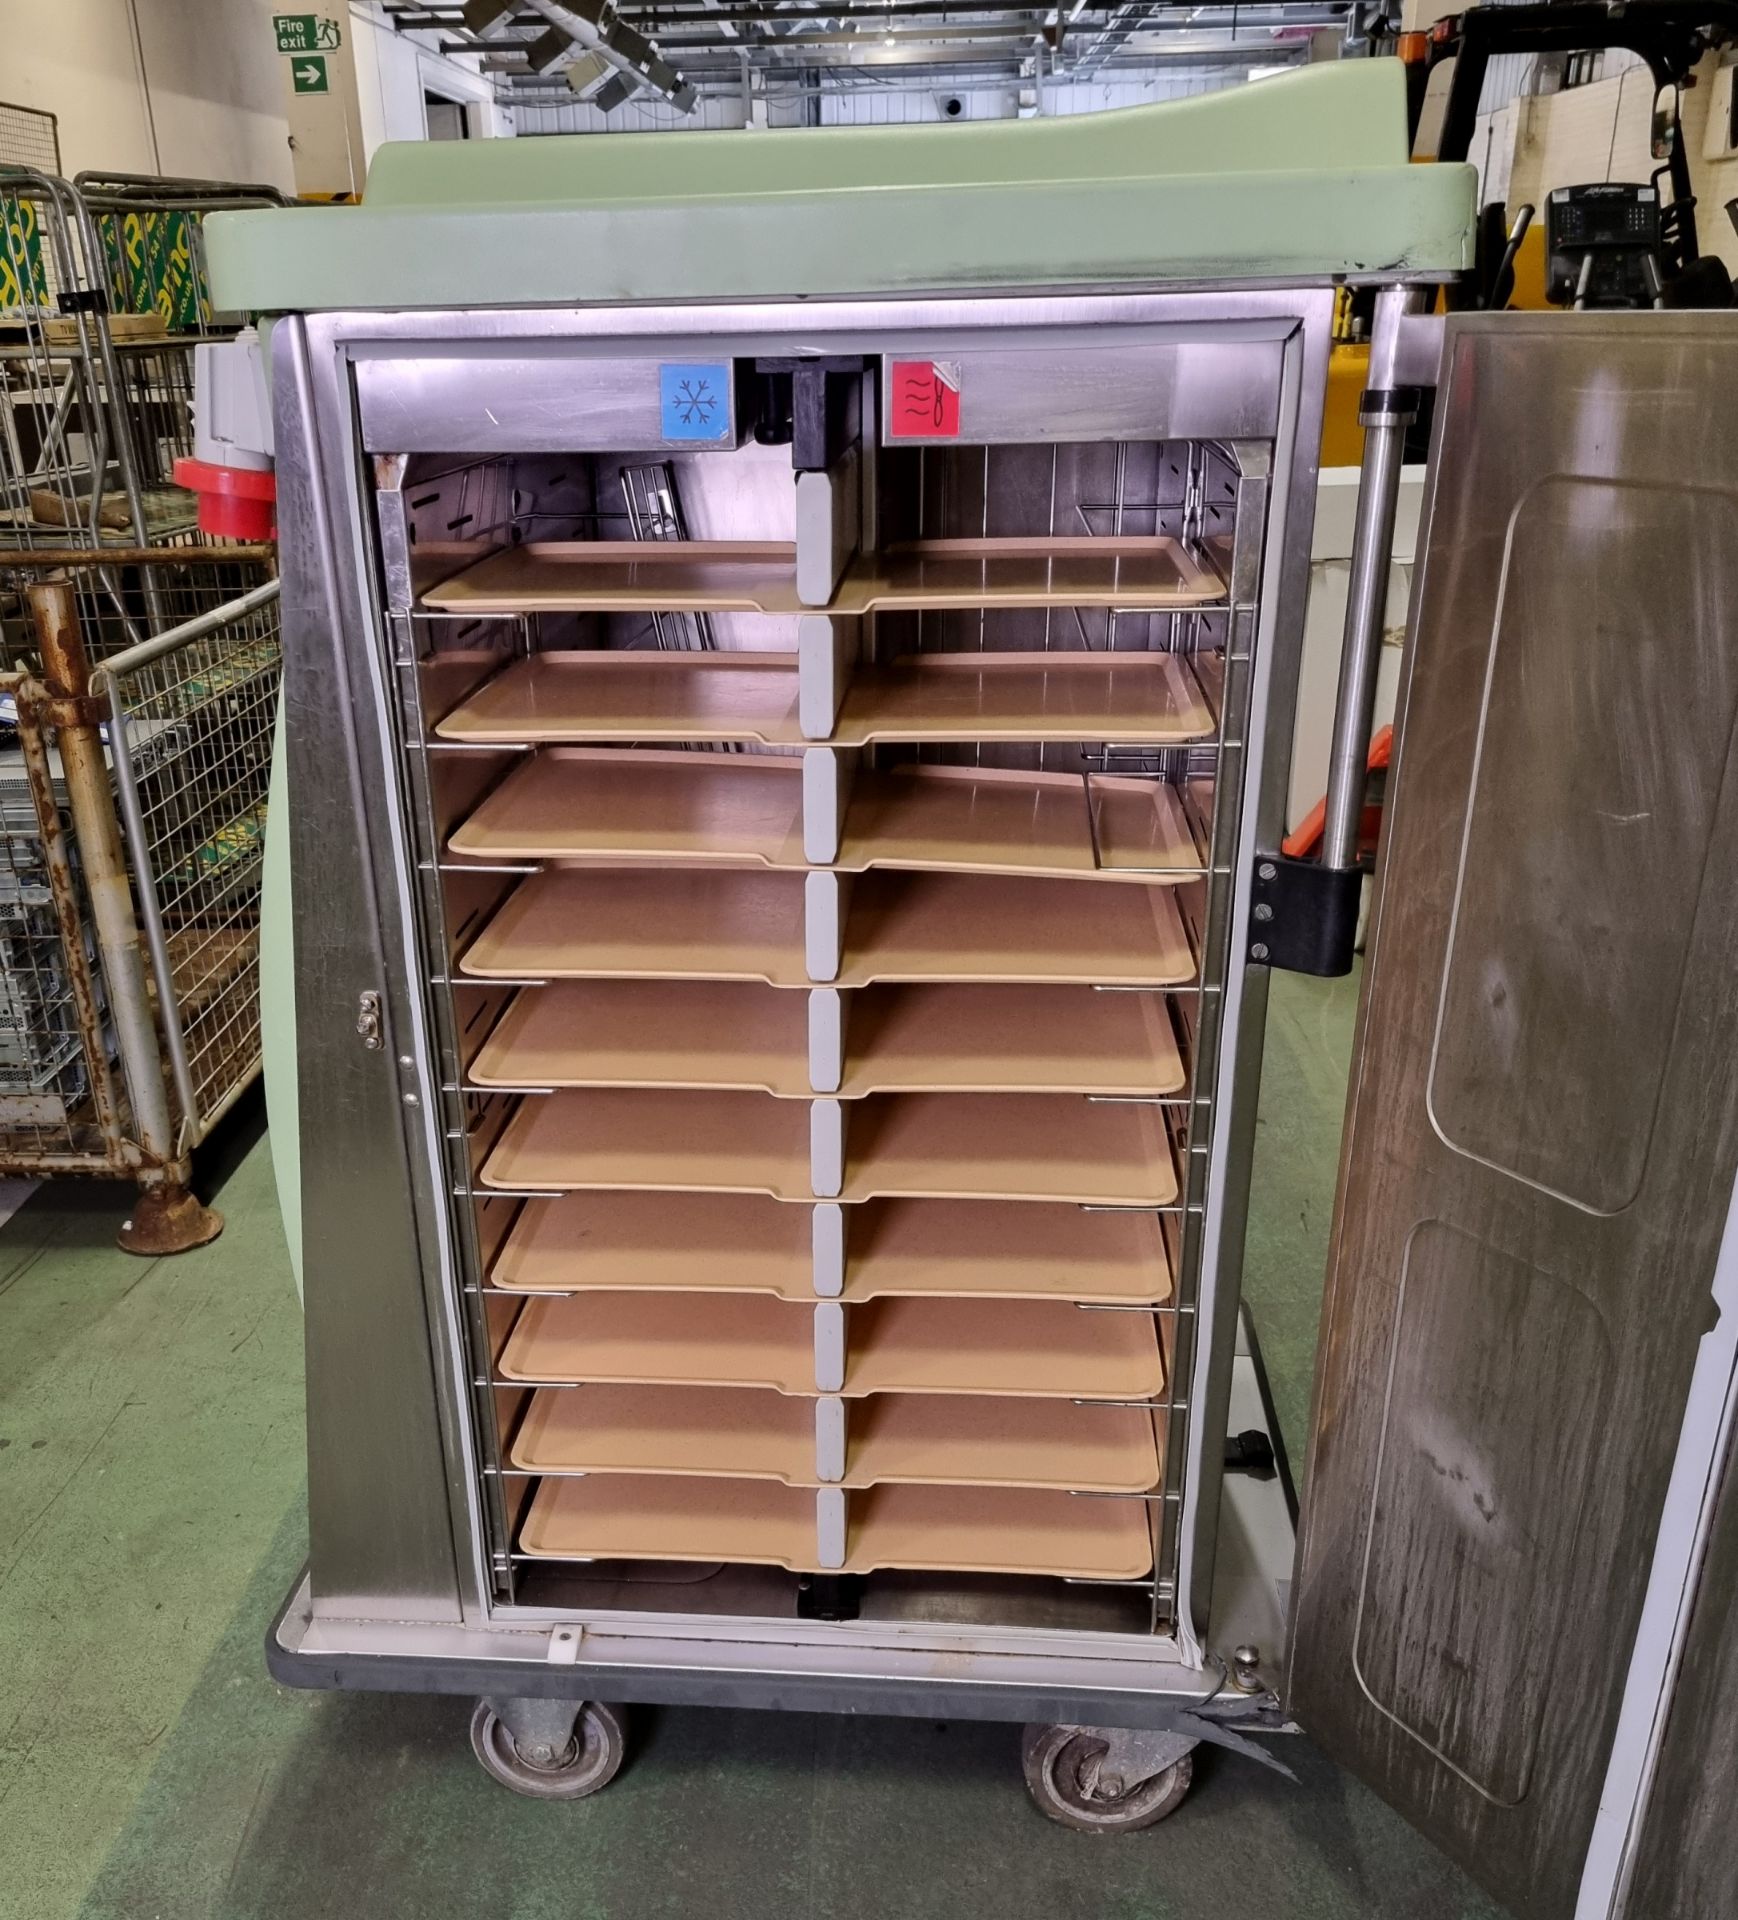 Burlodge RTS hot and cold tray delivery trolley - opens boths sides - W 800 x D 1100 x H 1500mm - Bild 3 aus 7